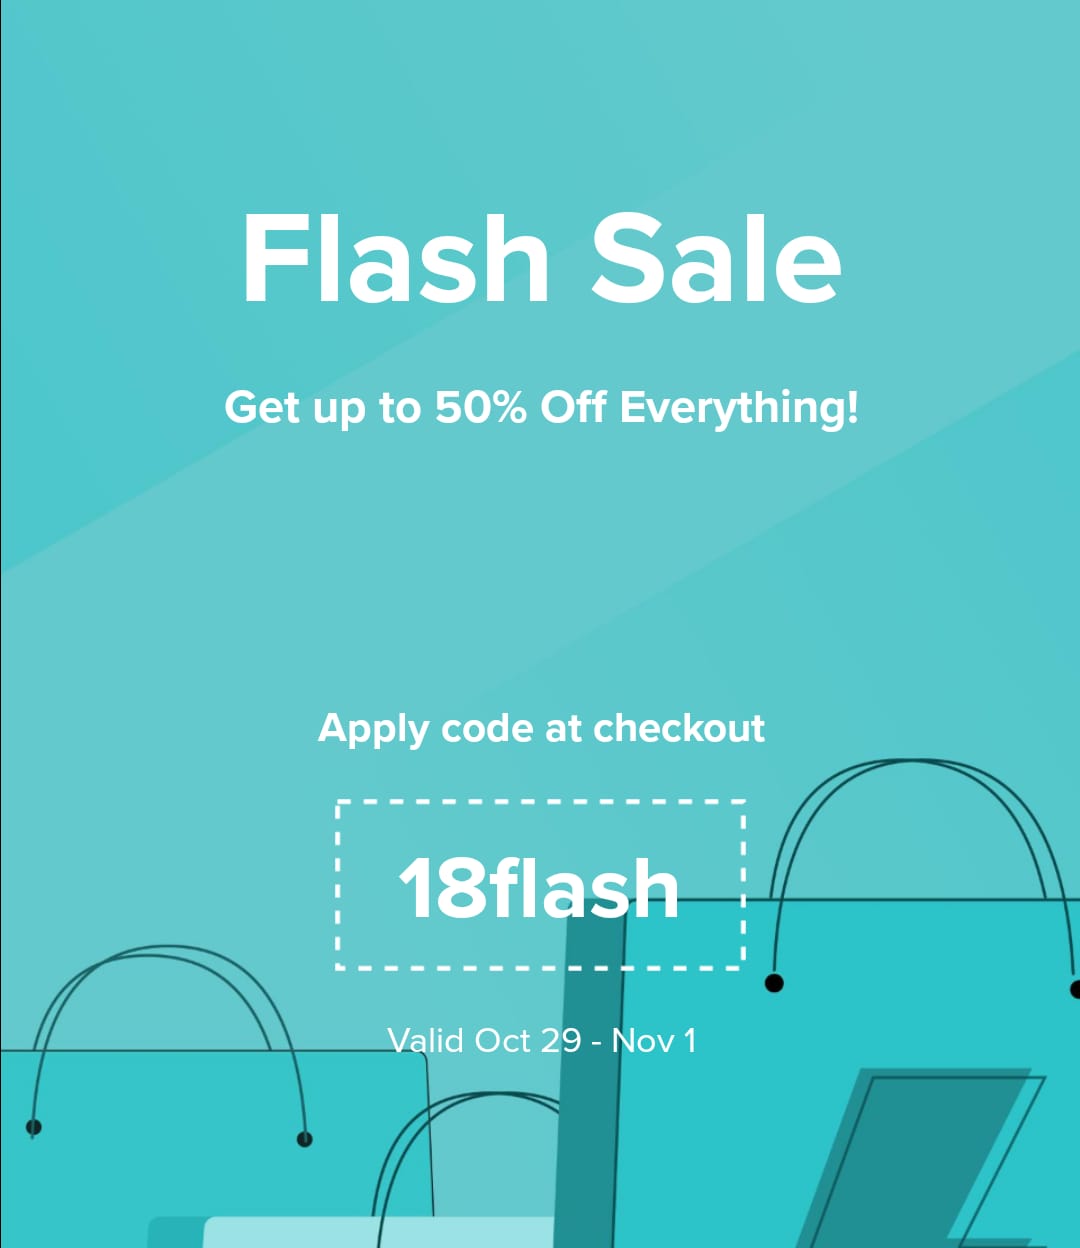 80% OFF! Wish promo codes ( Existing Customers) free shipping 2021 | - Coupon Reddit 2021